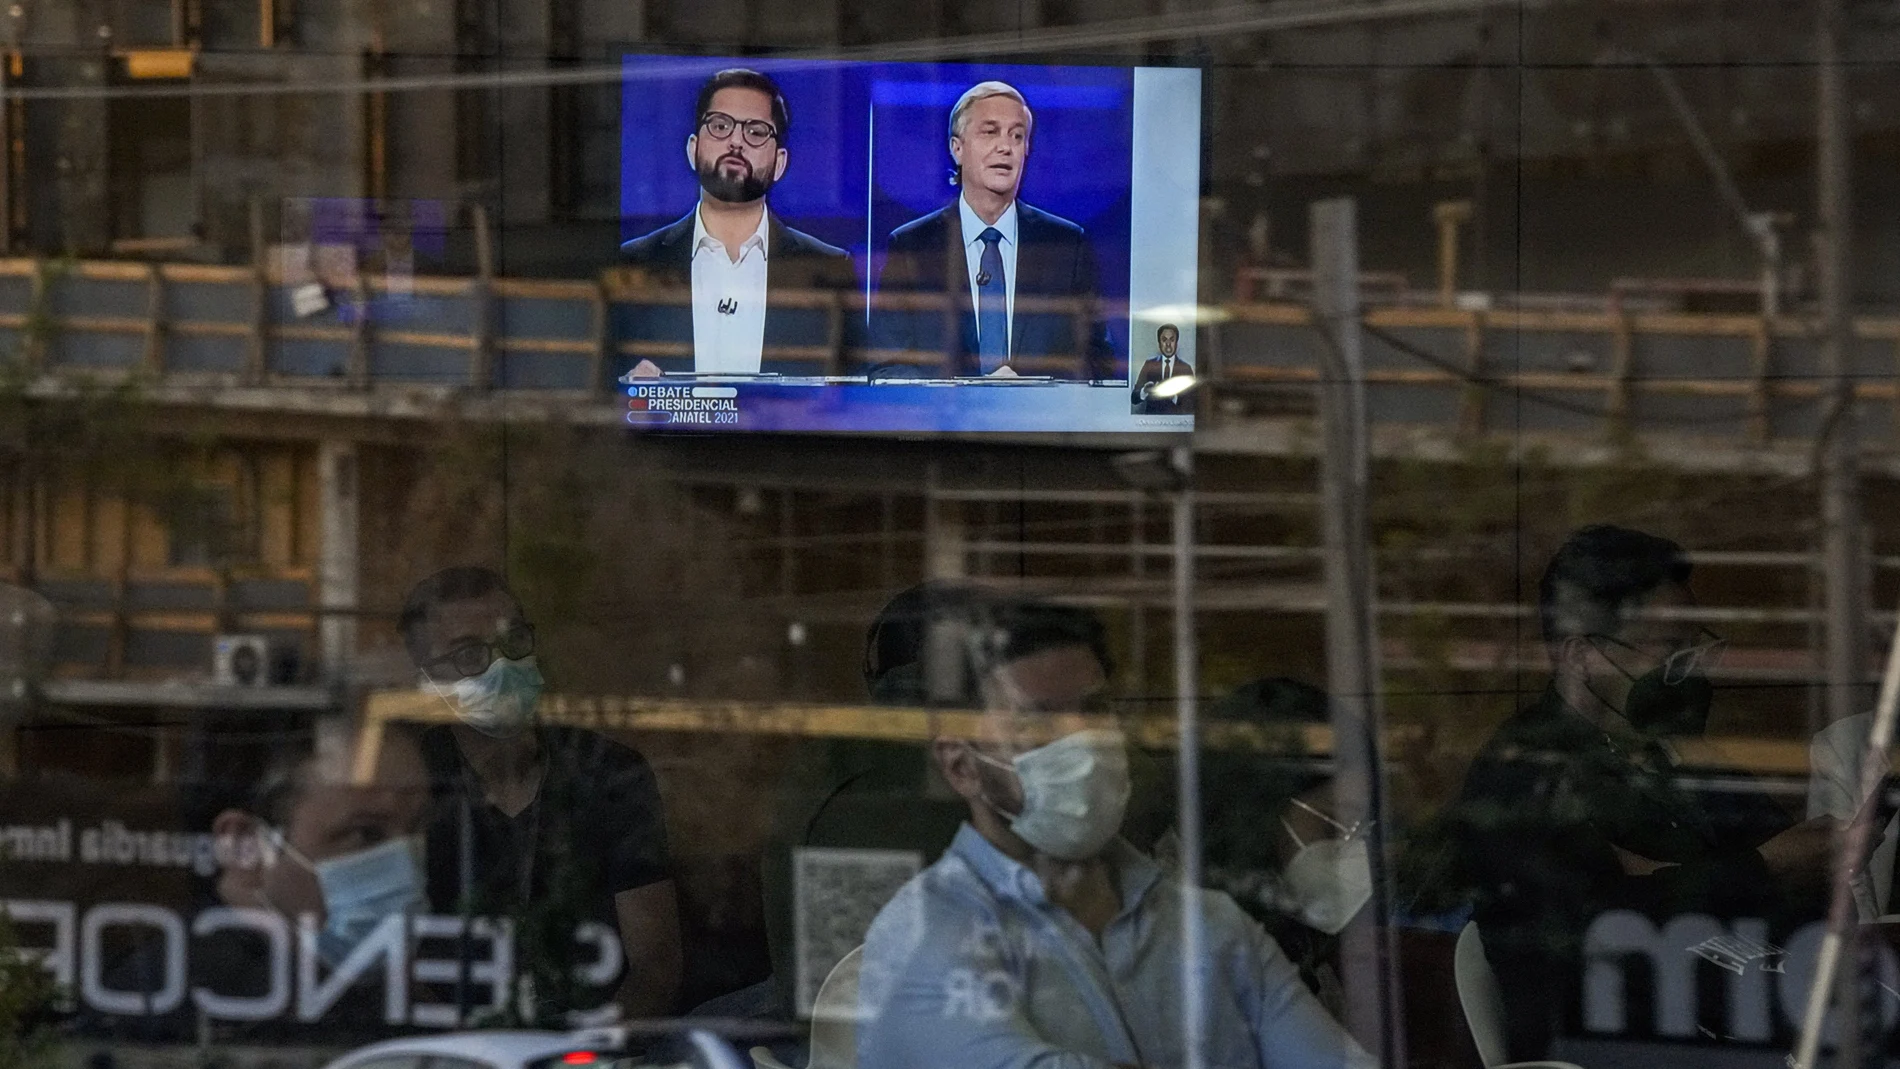 Journalists watch the debate between presidential candidate Gabriel Boric from the Apruebo Dignidad coalition party, and presidential candidate Jose Antonio Kast from the Partido Republicano in a hall of the National Television Channel in Santiago, Chile, Monday, Dec. 13, 2021. Chile votes in the runoff election on Dec. 19. (AP Photo/Esteban Felix)